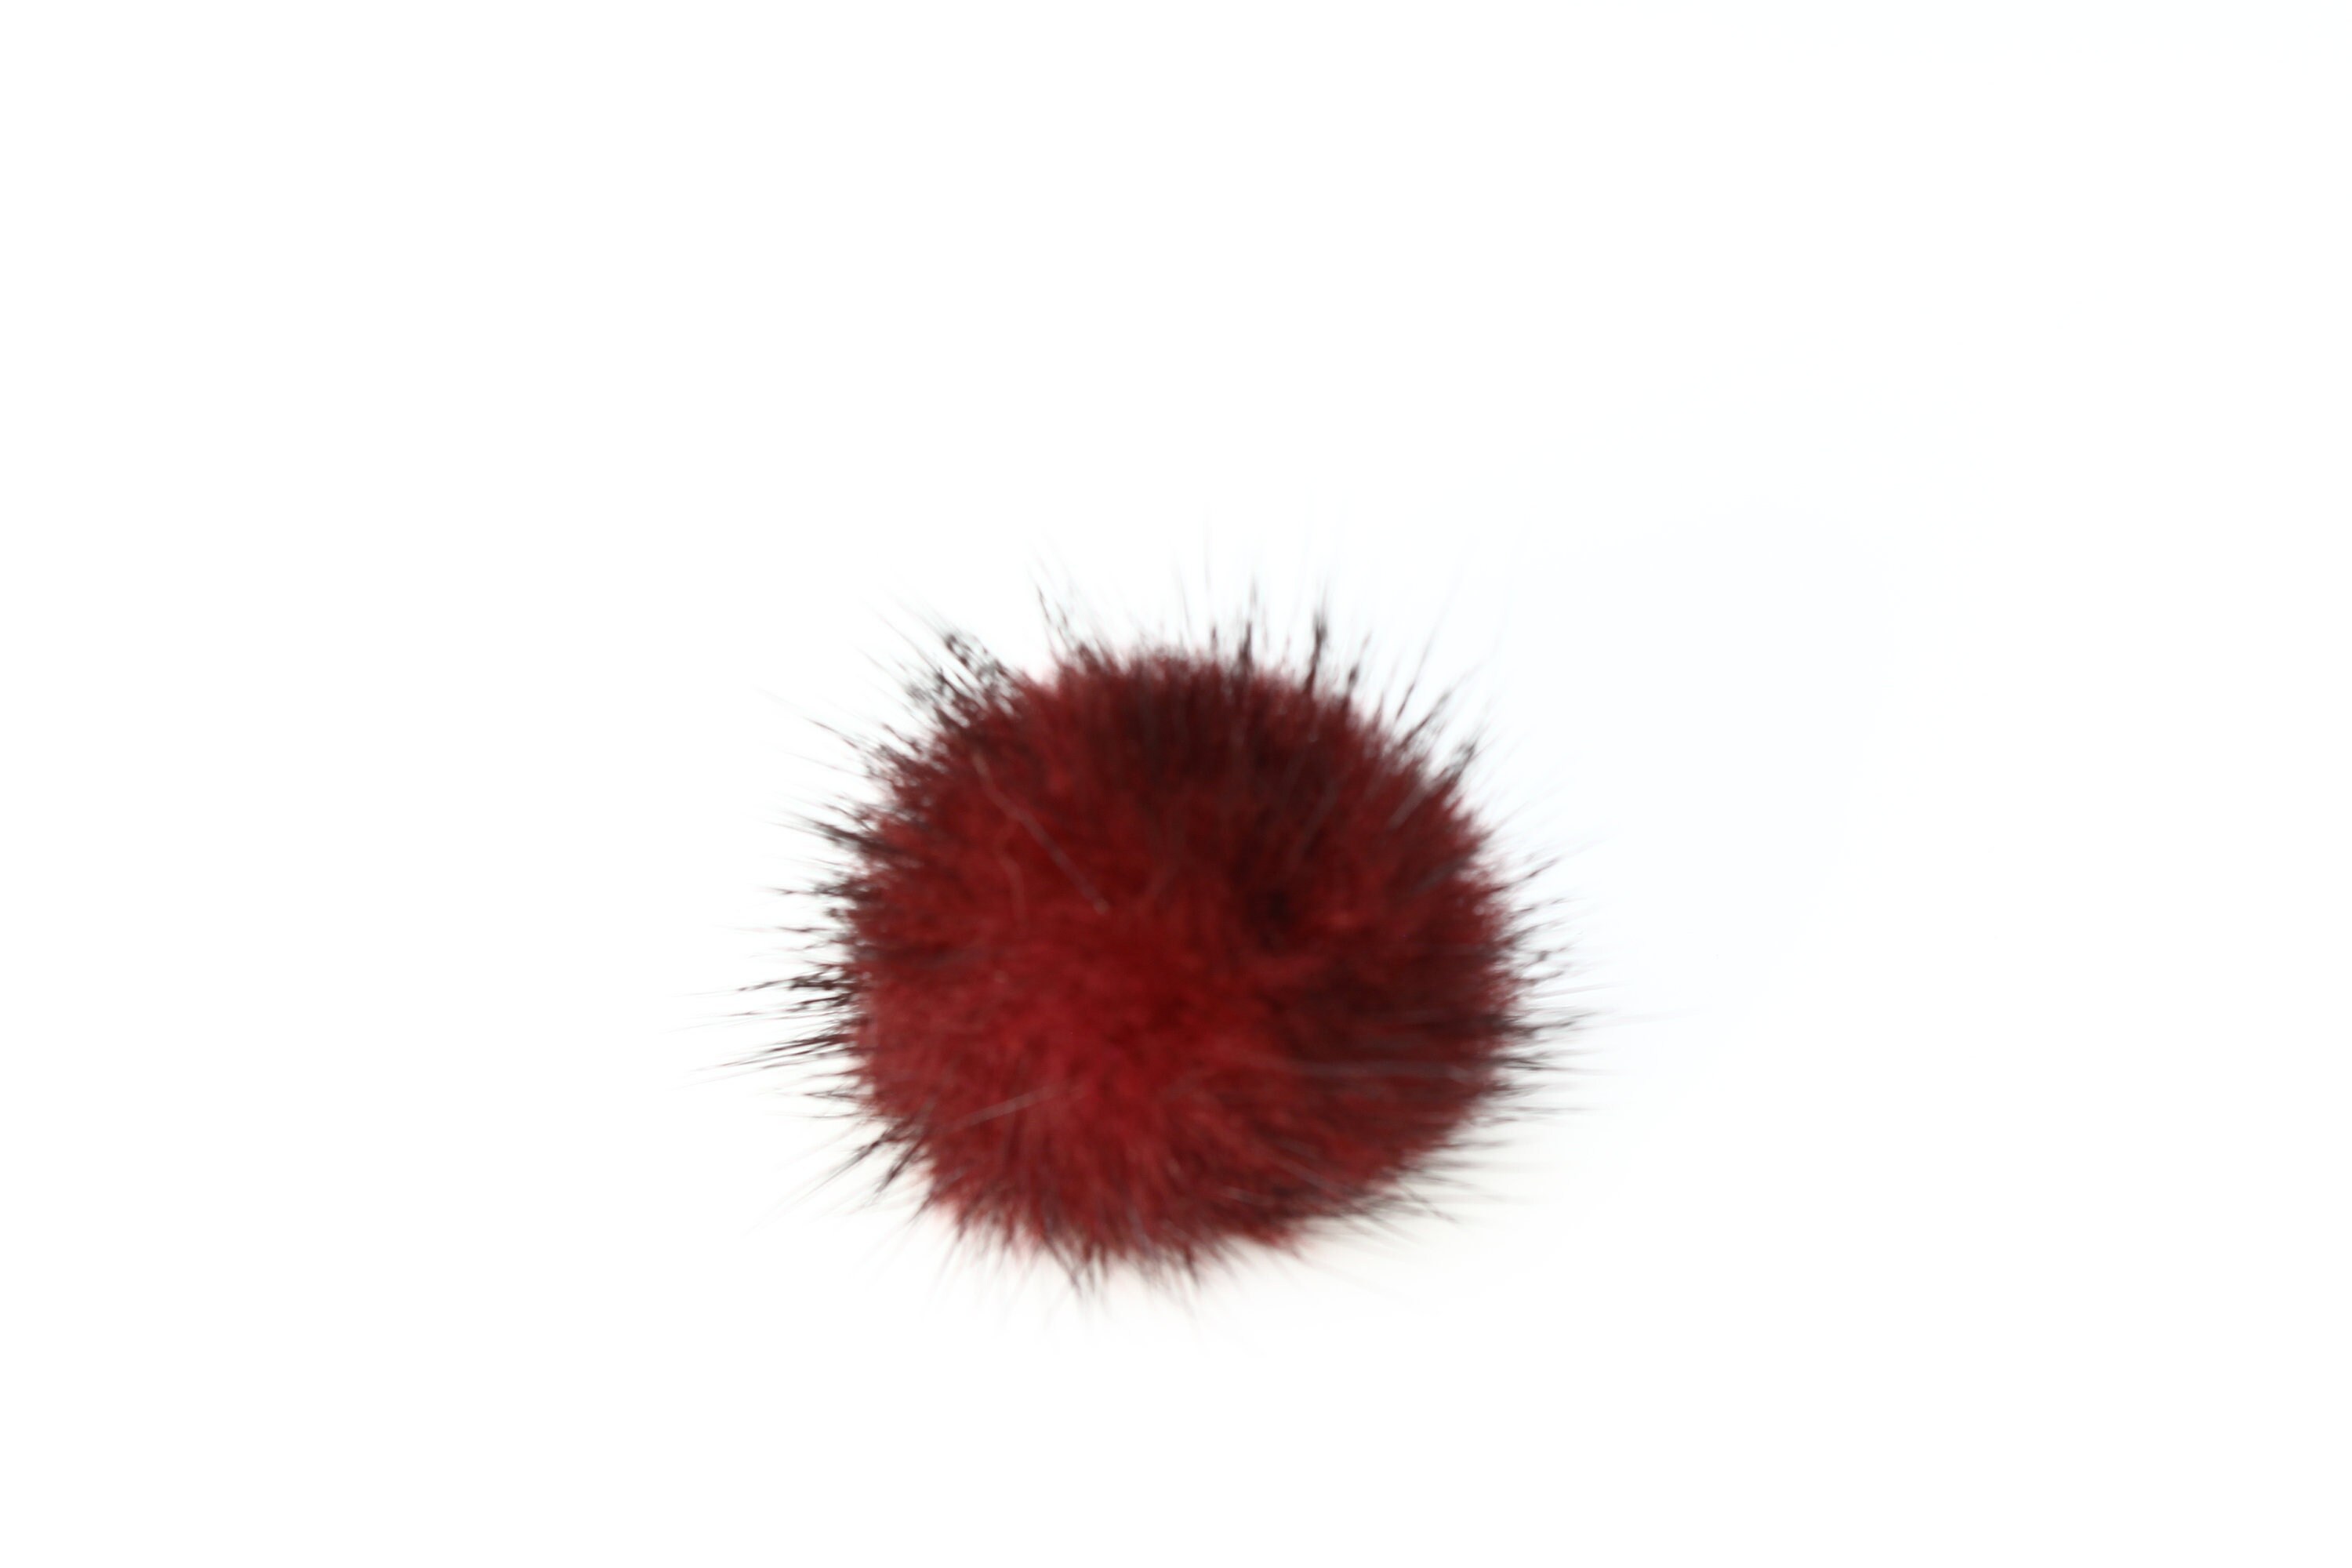 Pack of 25 Pcs 1-1/2 Inch 38mm Shaggy Pom Poms for Crafts 